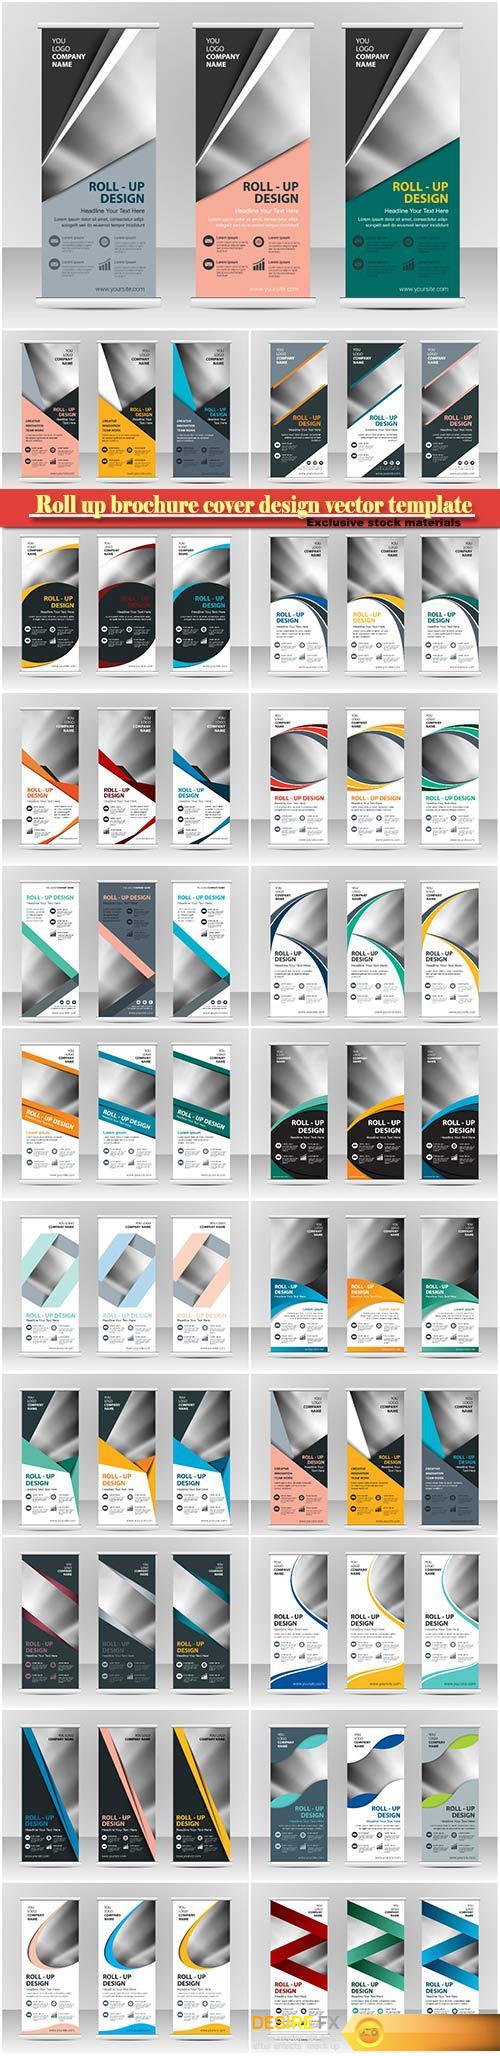 Roll up brochure cover design vector template